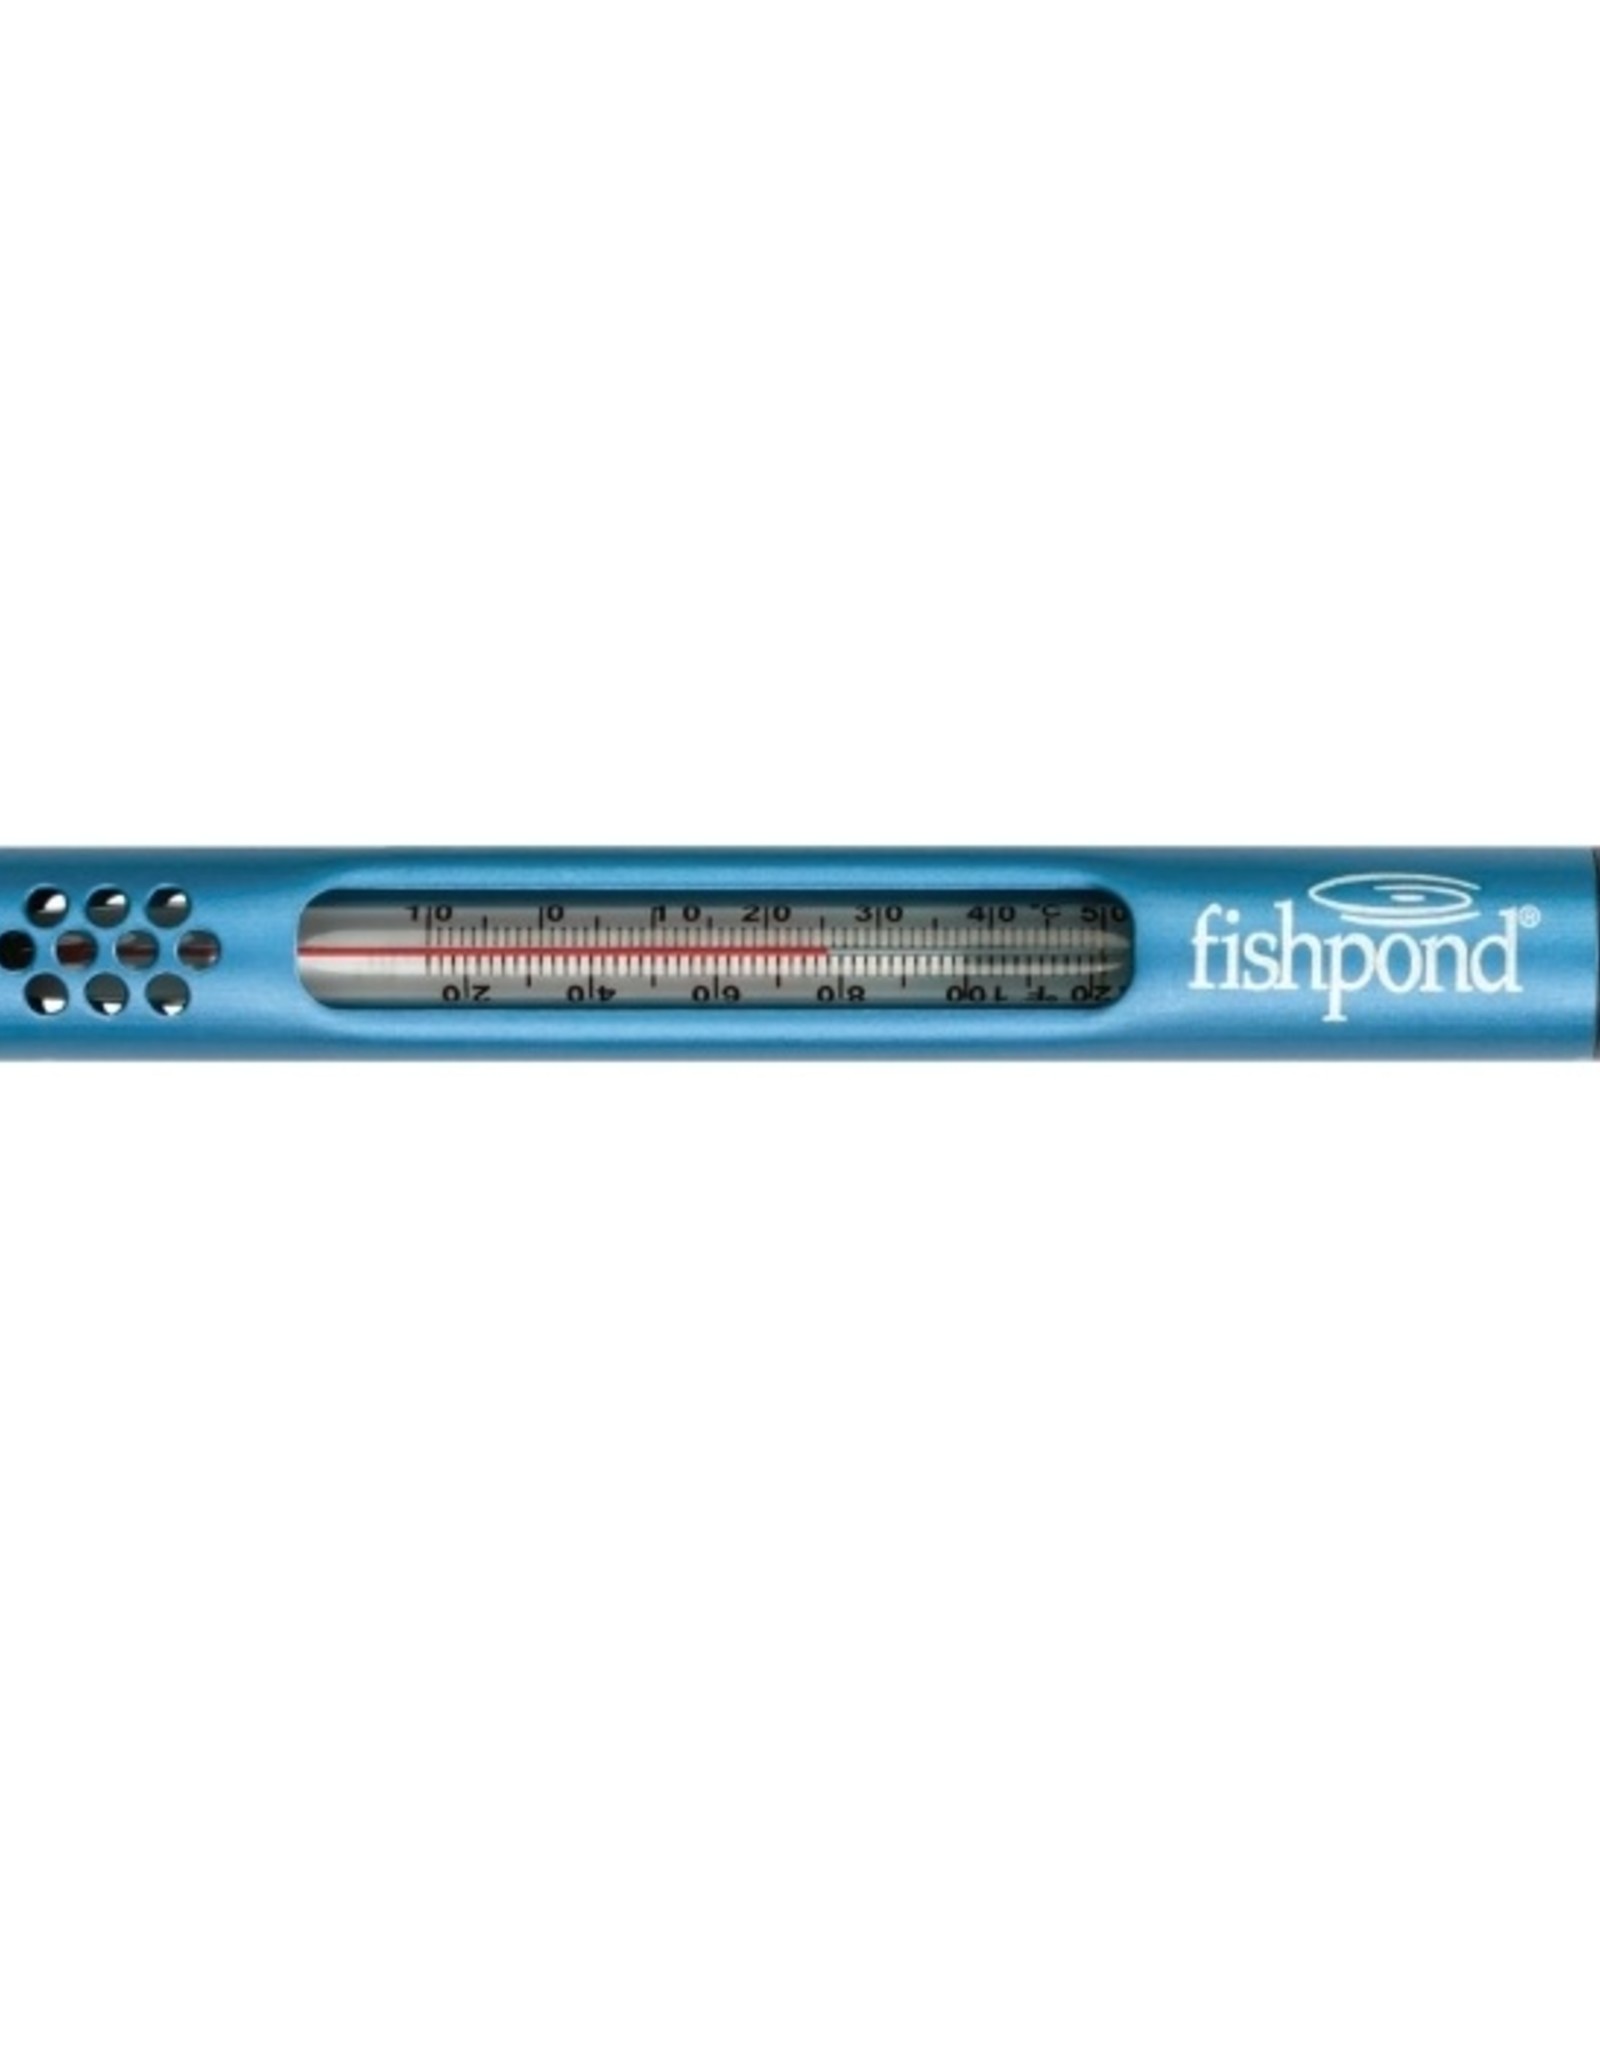 Fishpond SwiftCurrent Thermometer